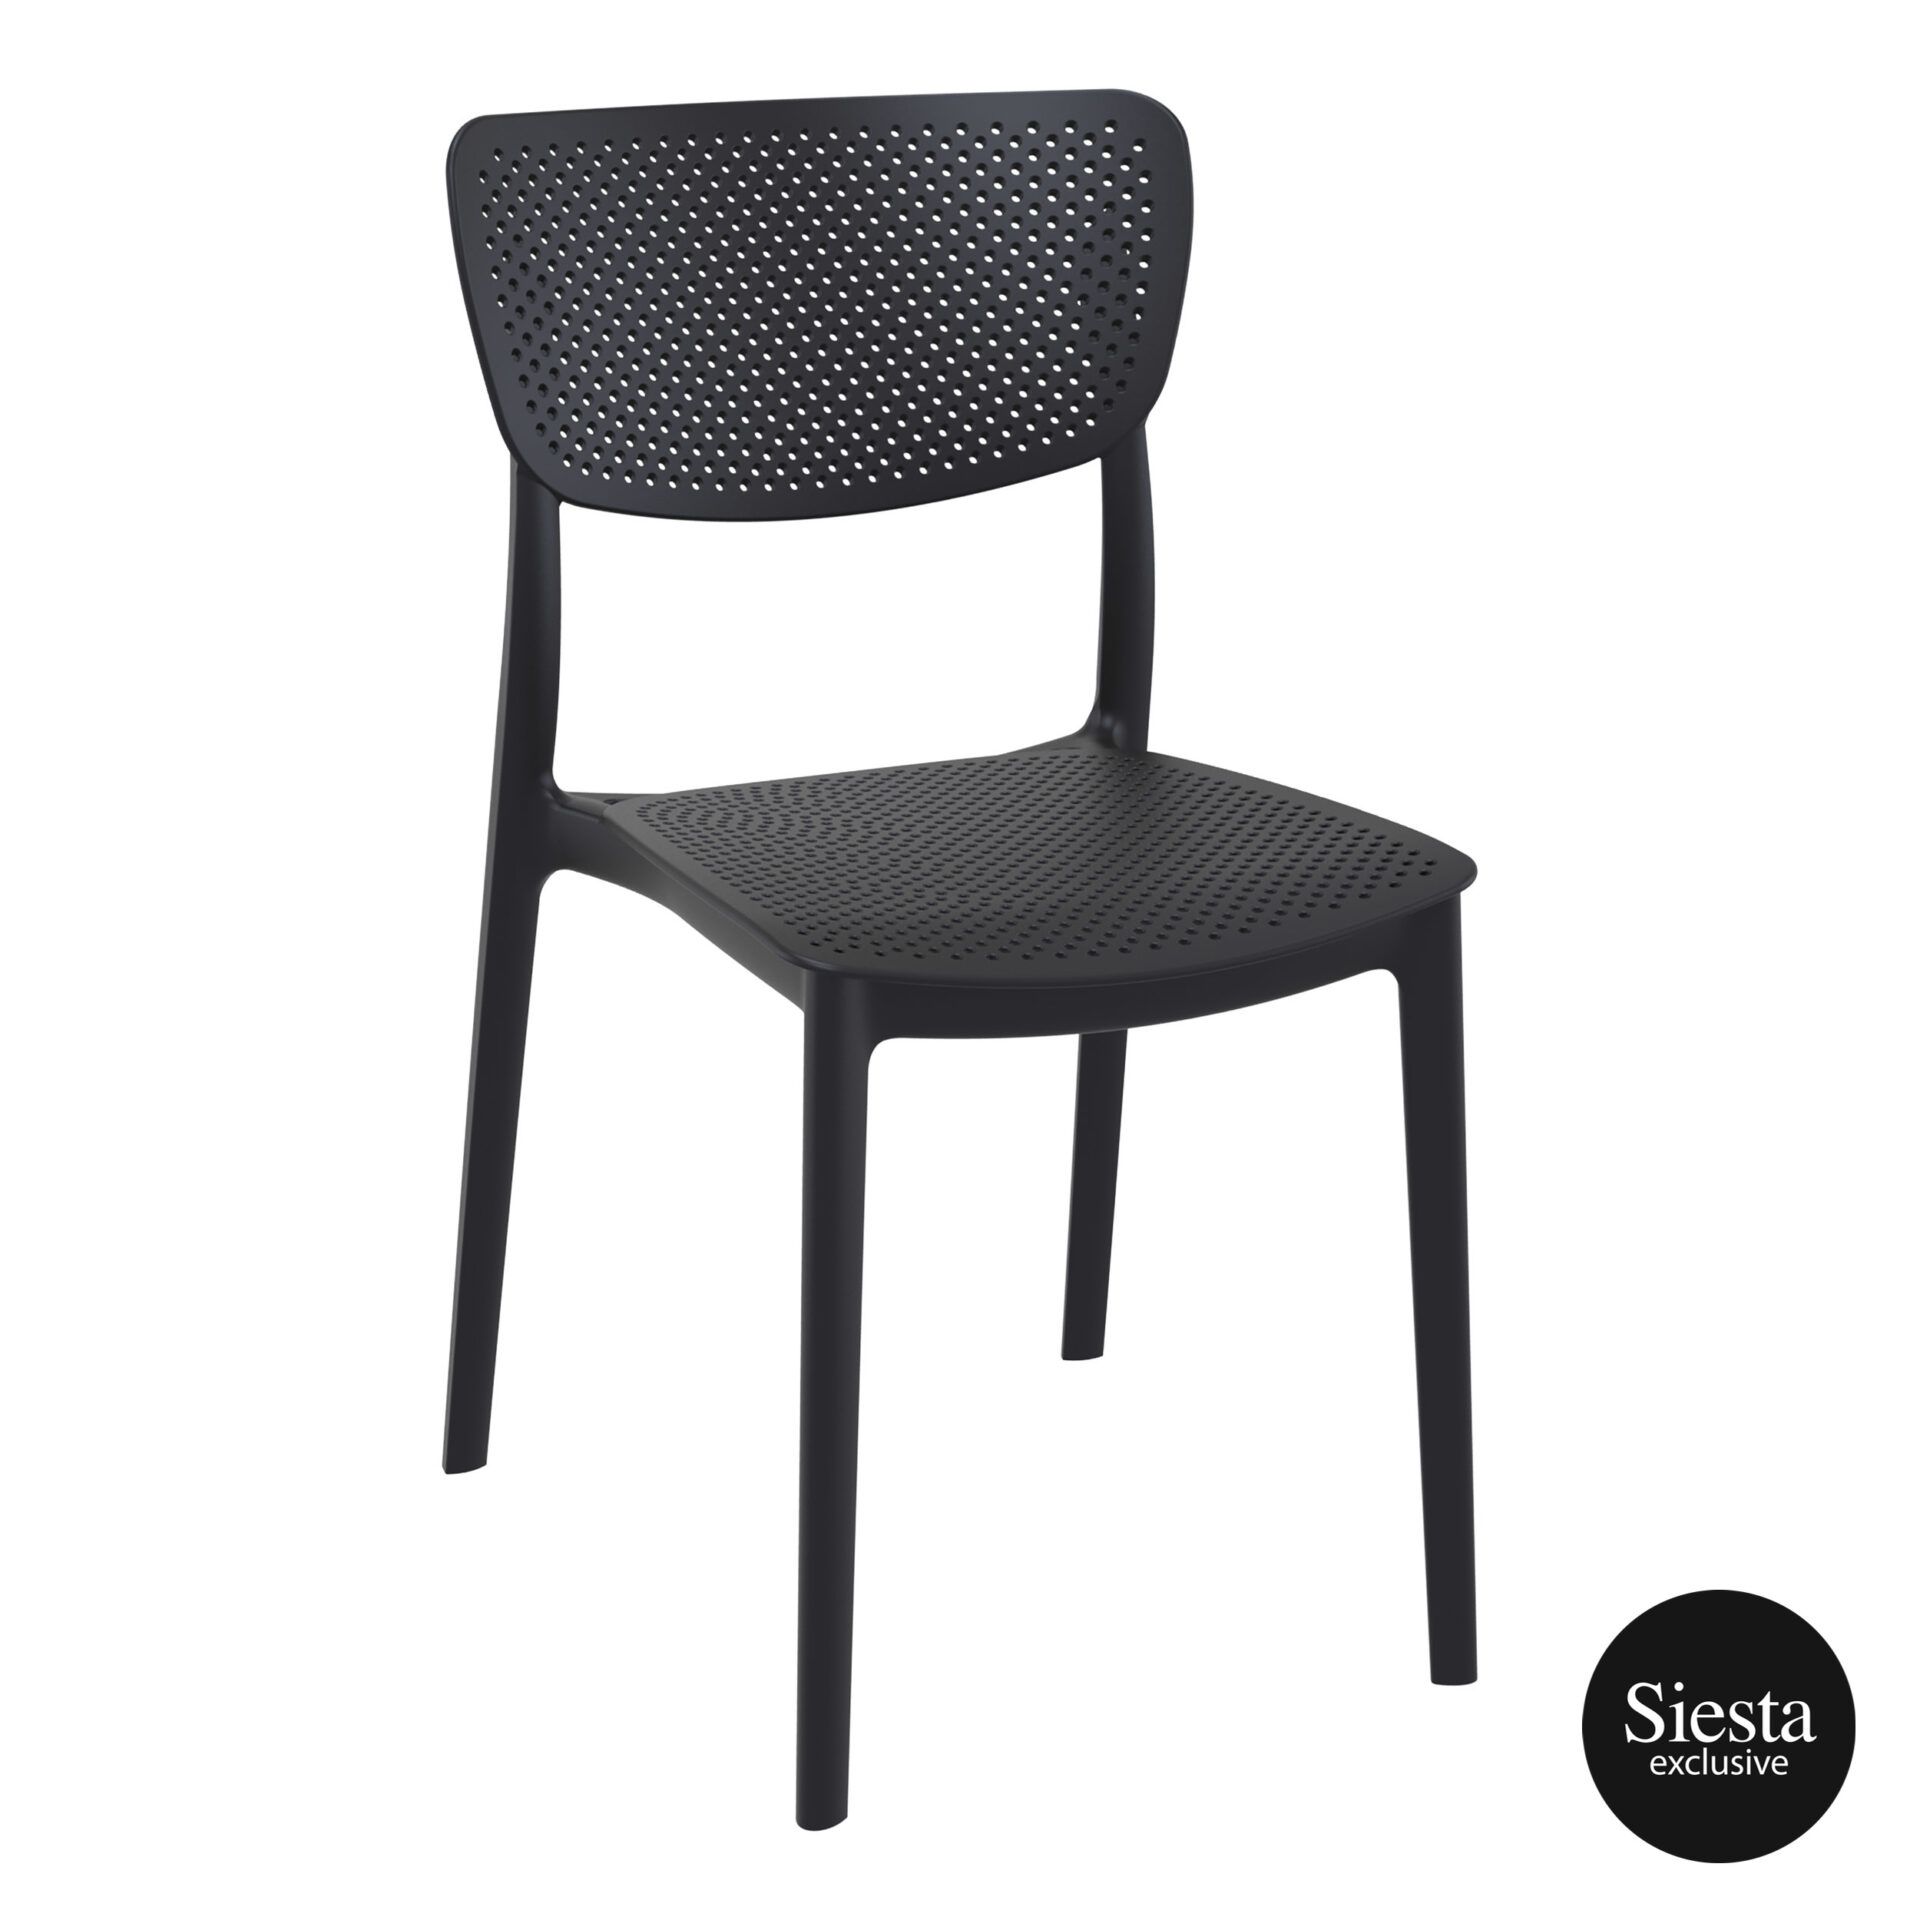 Lucy Chair - Black